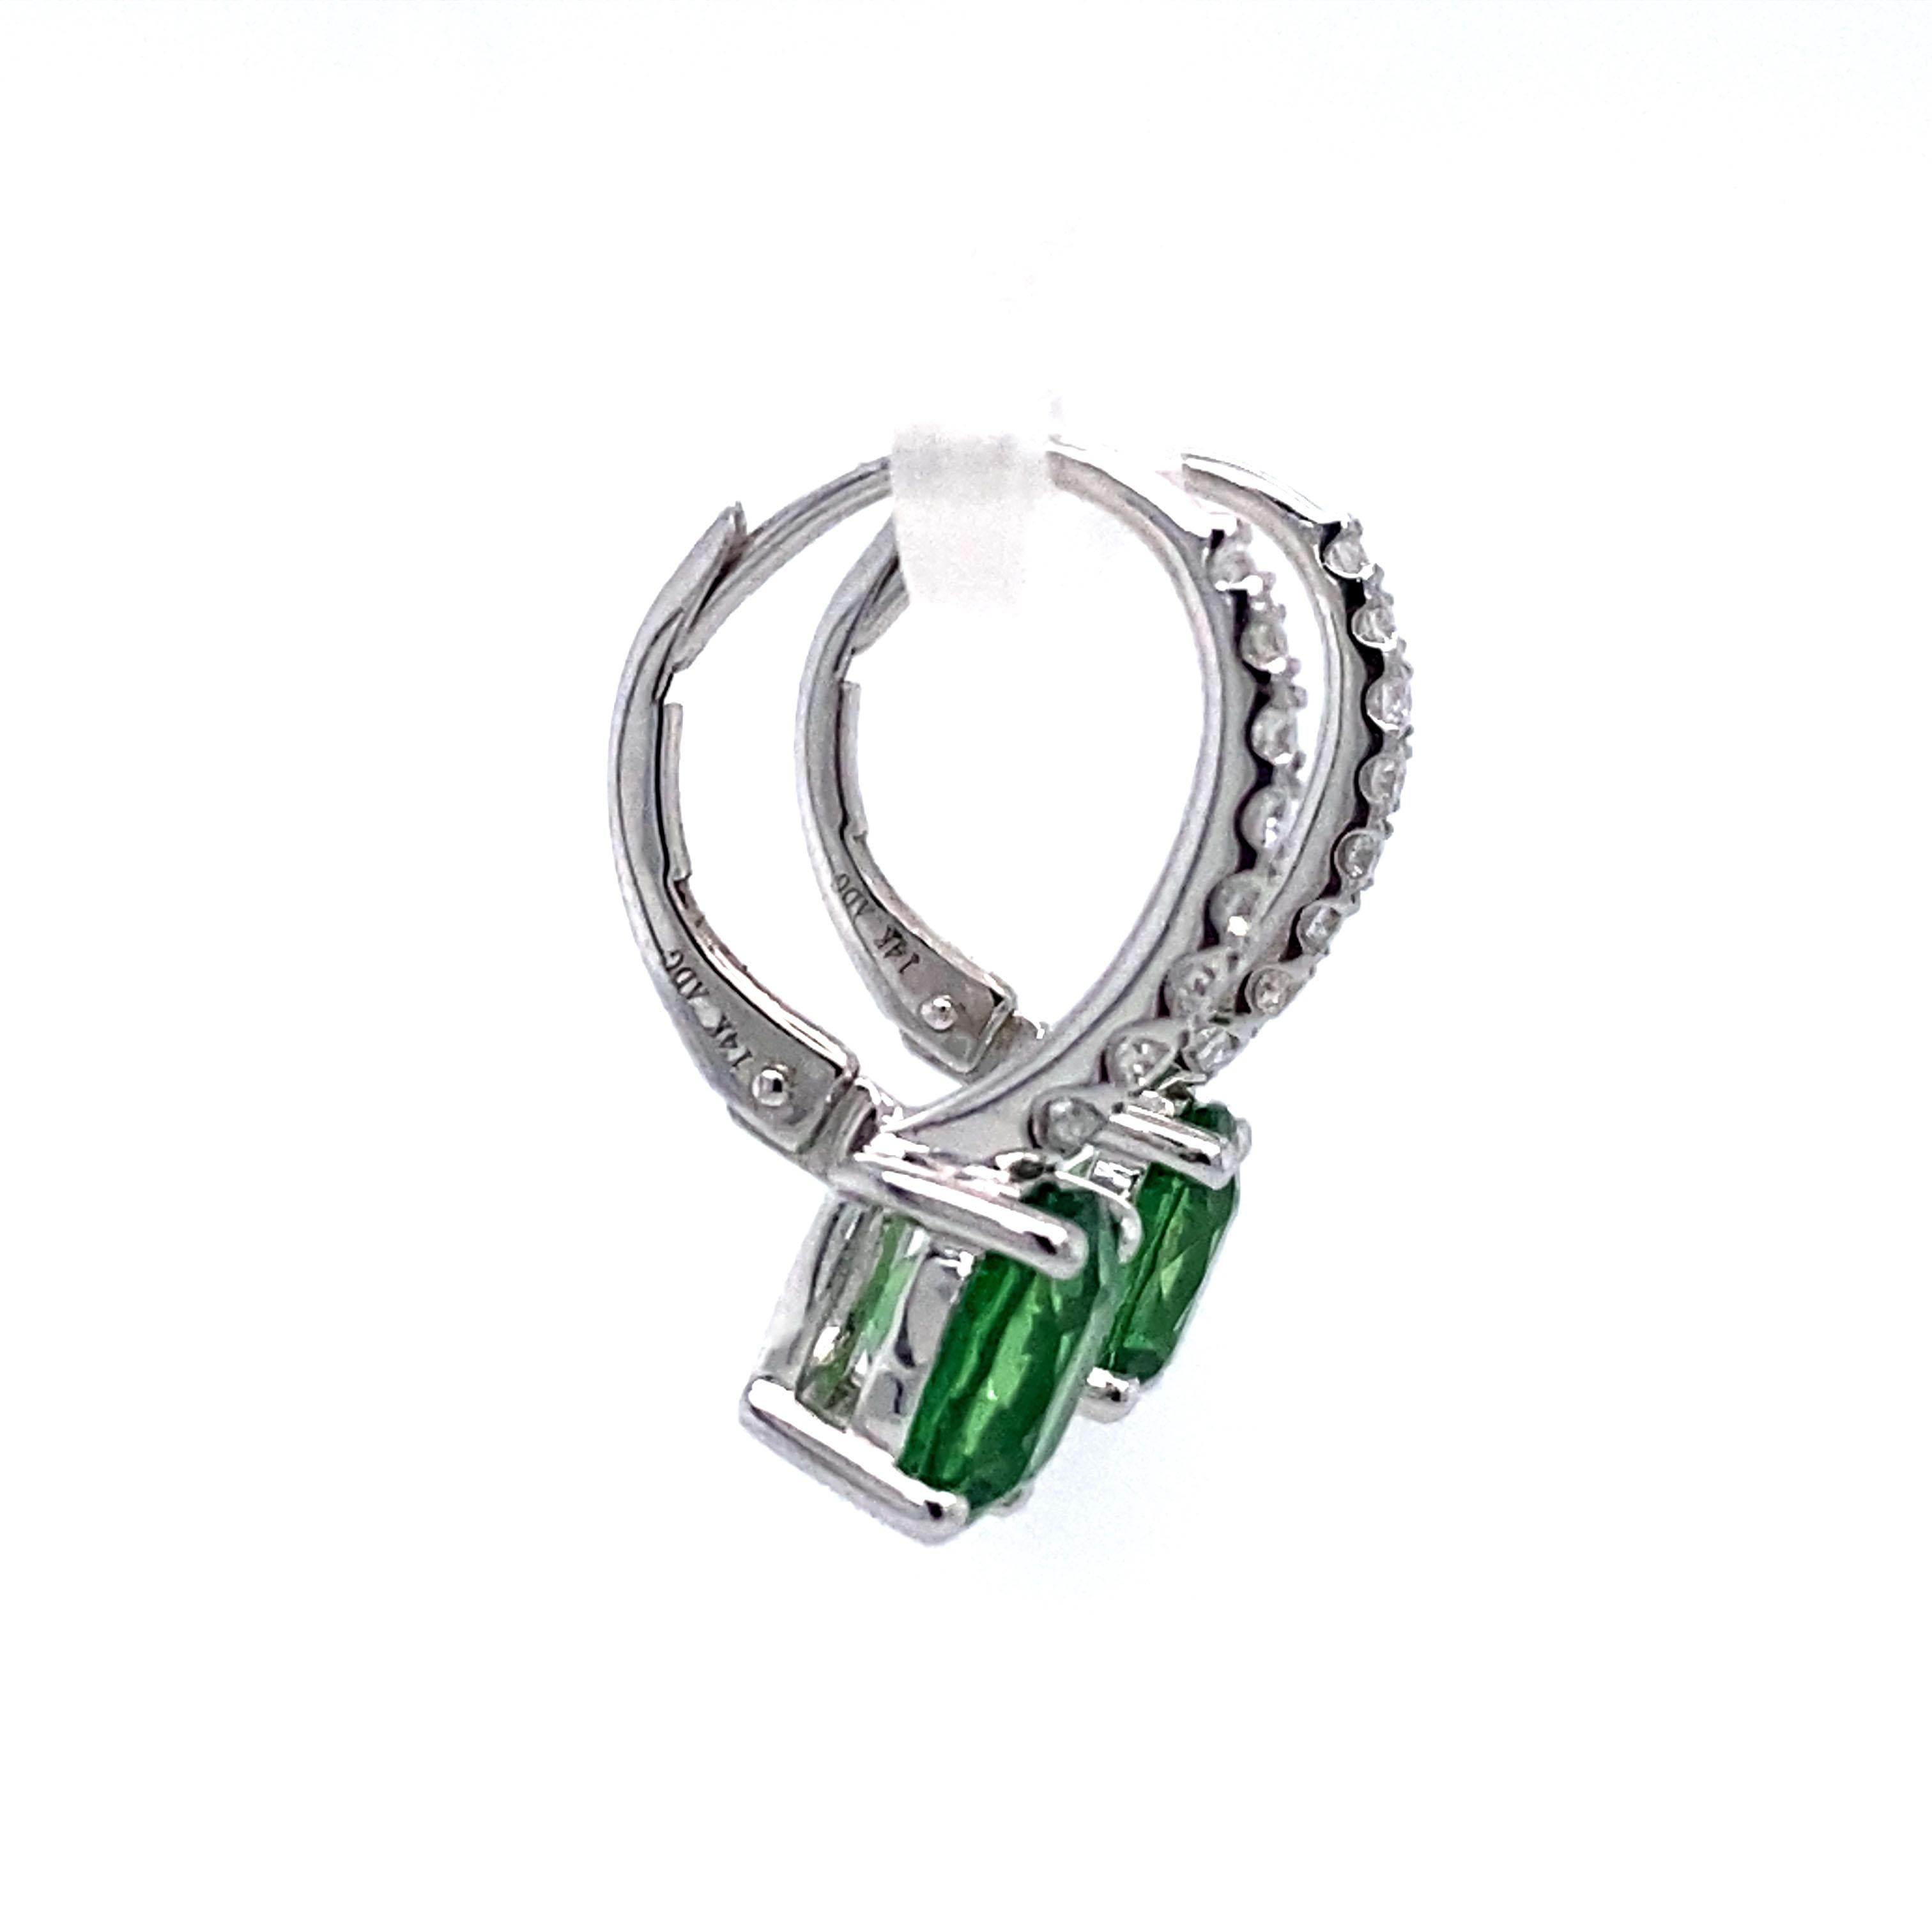 Circa: 1980s
Metal Type: 14 Karat White Gold
Weight: 3.4 grams
Dimensions: 0.75in Length

Peridot Details:

Carat: 2.0 carat total weight
Shape: Oval
Color: Vibrant green